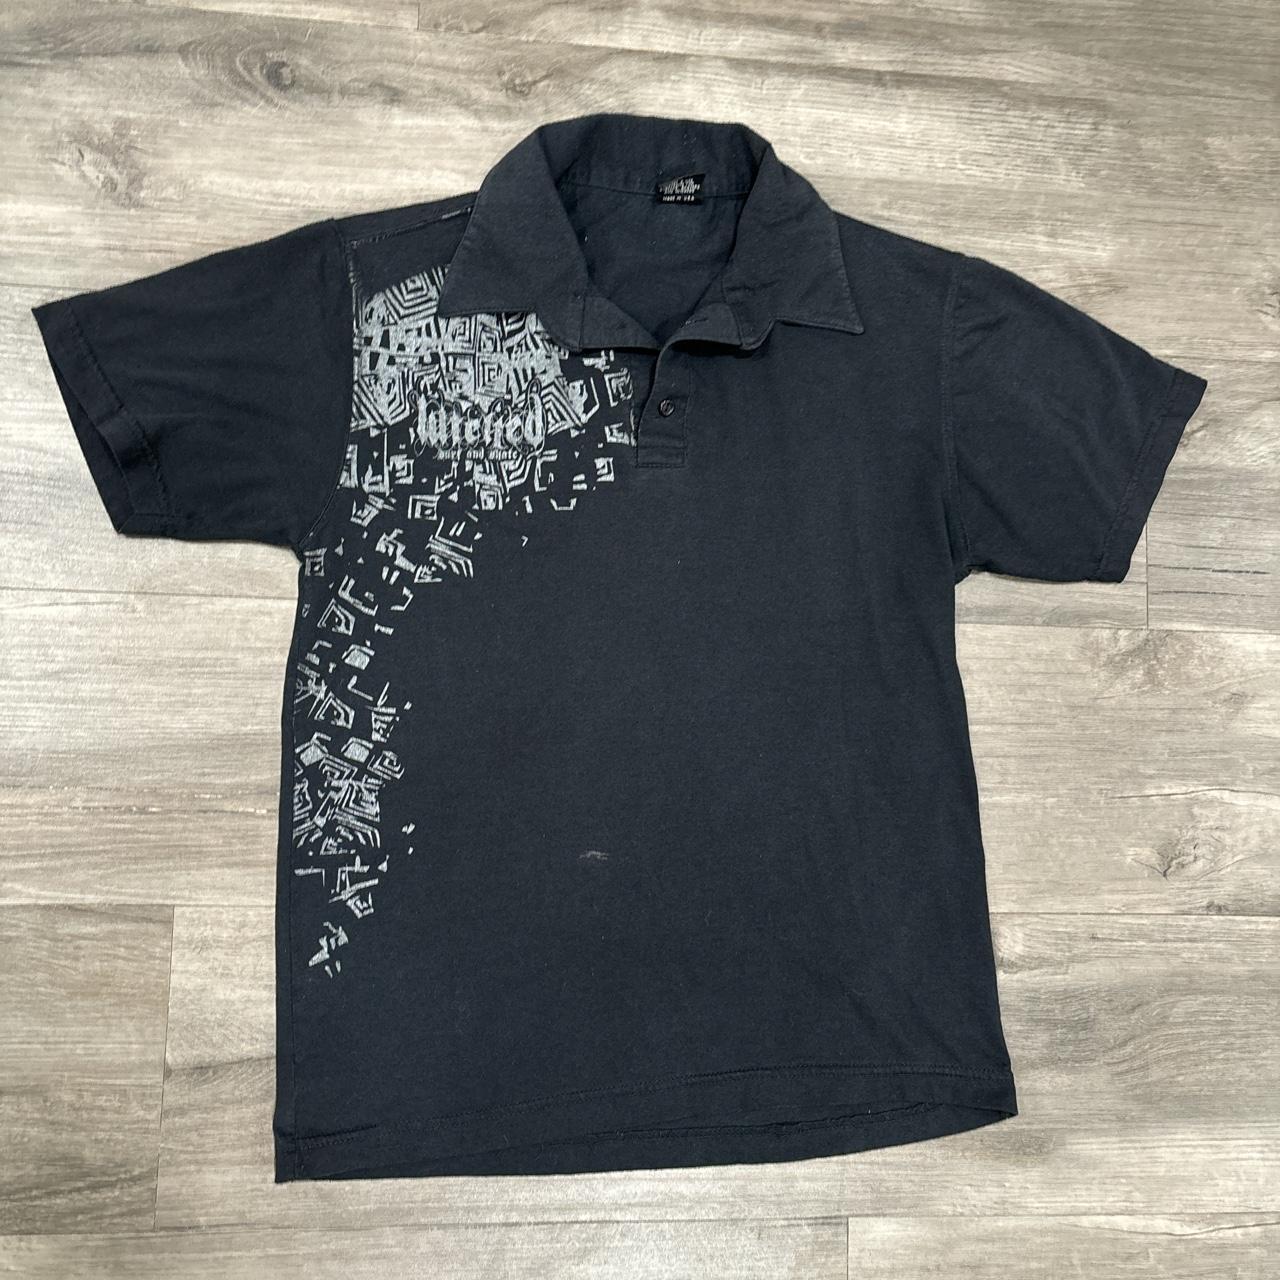 y2k affliction style wicked polo shirt in good... - Depop